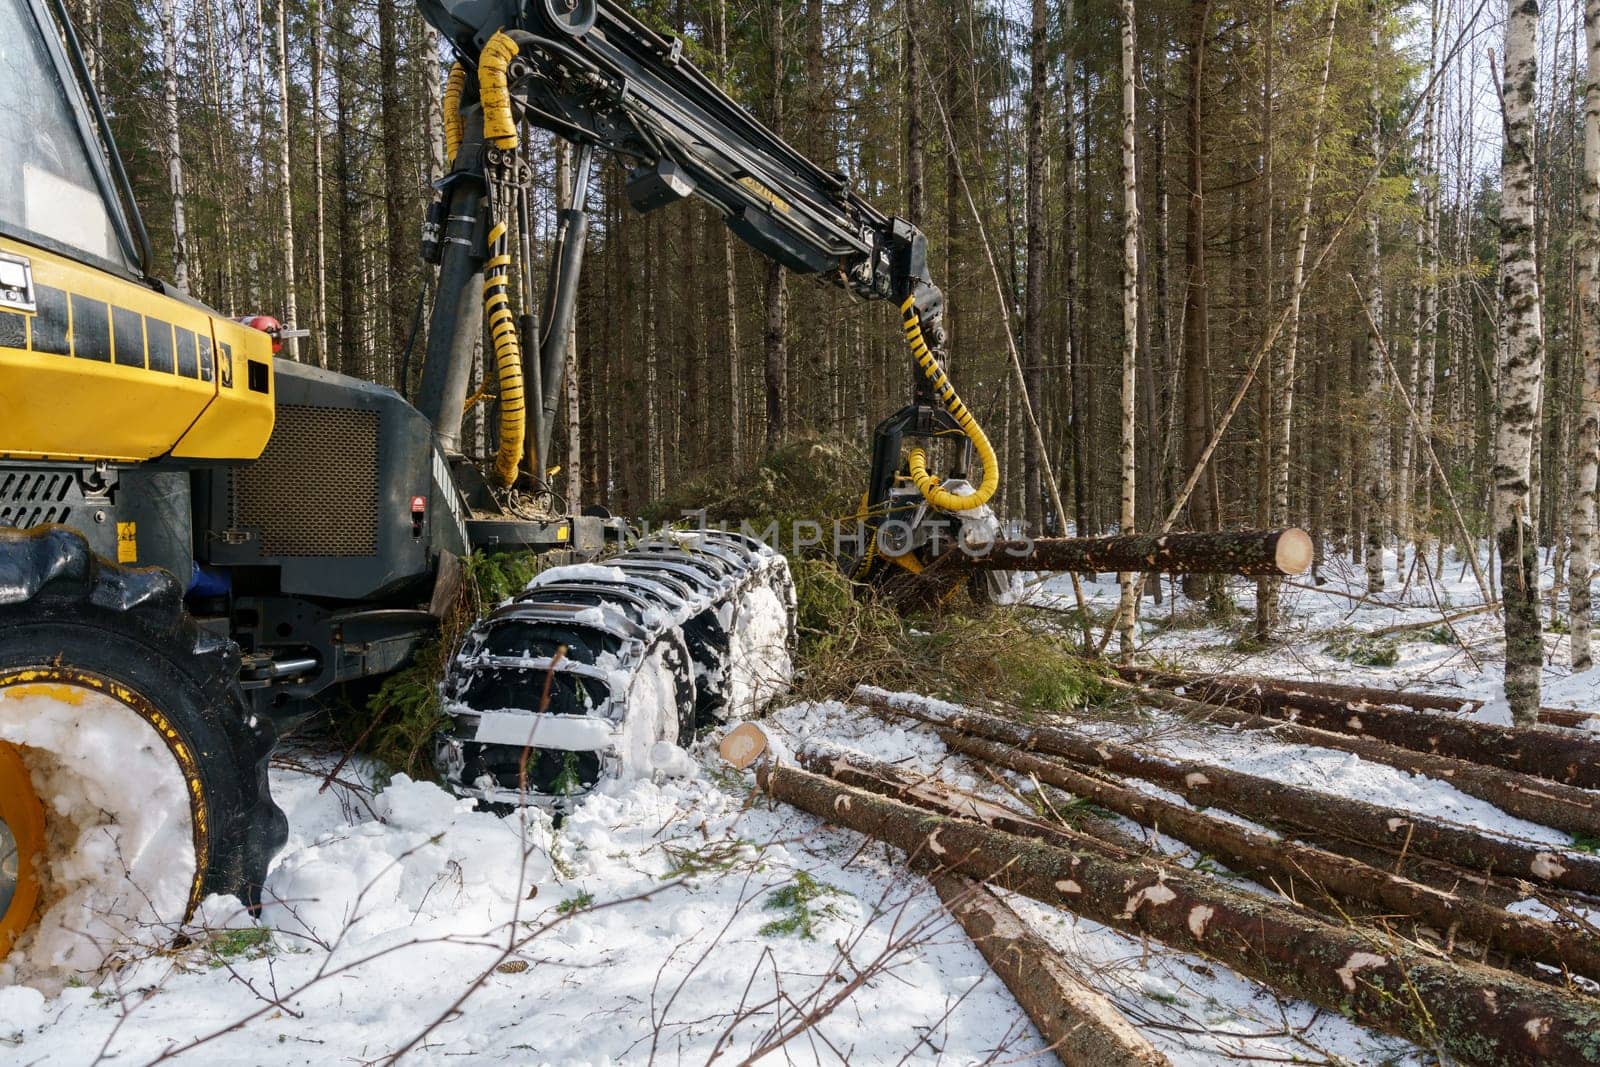 Image of logger cut down trees in winter forest by rivertime